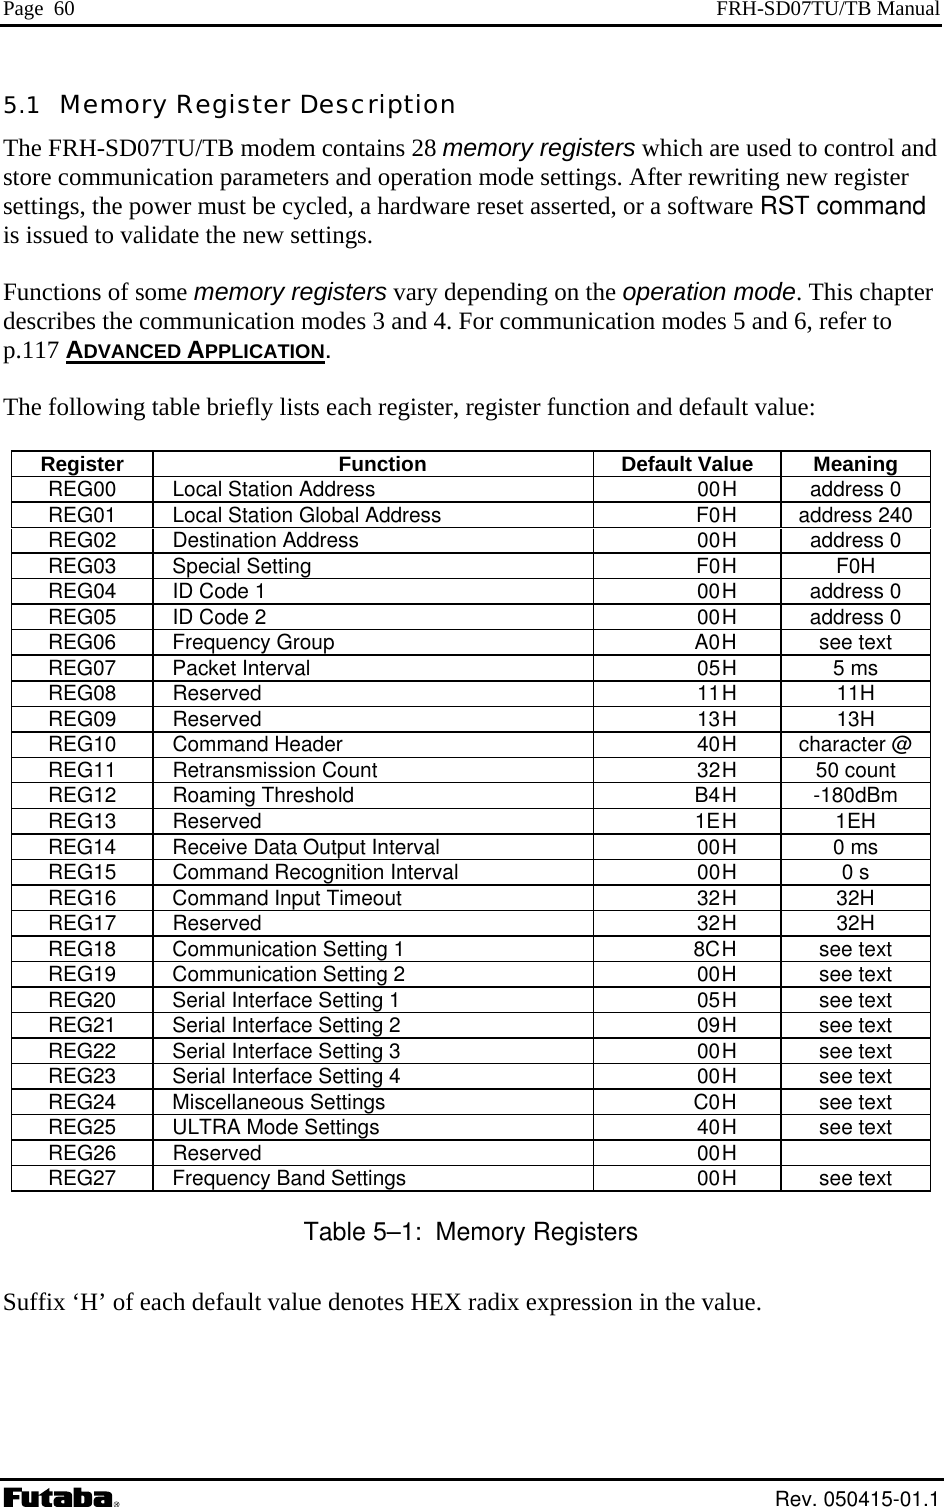 Page  60  FRH-SD07TU/TB Manual 5.1  Memory Register Description The FRH-SD07TU/TB modem contains 28 memory registers which are used to control and store communication parameters and operation mode settings. After rewriting new register settings, the power muis issued to validat Functions of some memory registers vary depending on the operation mode. This chapter describes the communication modes 3 and 4. For communication modes 5 and 6, refer to p.117 ADVANCED APPLICATIONst be cycled, a hardware reset asserted, or a software RST command e the new settings. .  The following table briefly lists each register, register function and default value:  Register   Function  Default Value  Meaning REG00    Local Station Address  00H  address 0 REG01    Local Station Global Address  F0H  address 240REG02  Destination Address 00H address 0 REG03  Special Setting  F0H  F0H REG04    ID Code 1  00H  address 0 REG05    ID Code 2  00H  address 0 REG06    Frequency Group  A0H  see text REG07    Packet Interval  05H  5 ms REG08  Reserved  11H  11H  REG09  Reserved   13H  13H  REG10    Command Header  40H  character @REG11    Retransmission Count  32H  50 count REG12  Roaming Threshold  B4H  -180dBm  REG13  Reserved  1EH  1EH  REG14    Receive Data Output Interval  00H  0 ms REG15    Command Recognition Interval  00H  0 s REG16    Command Input Timeout  32H  32H REG17  Reserved  32H  32H  REG18  8CH  see text   Communication Setting 1 REG19  g 2  00H  see text   Communication SettinREG20  05H  see text   Serial Interface Setting 1 REG21    Serial Interface Setting 2  09H  see text REG22    Serial Interface Setting 3  00H  see text REG23    Serial Interface Setting 4  00H  see text REG24    Miscellaneous Settings  C0H  see text REG25    ULTRA Mode Settings  40H  see text REG26  Reserved  00H    REG27    Frequency Band Settings  00H  see text Table 5–1:  Memory Registers S  ouffix ‘H’ f each default value denotes HEX radix expression in the value.  Rev. 050415-01.1 